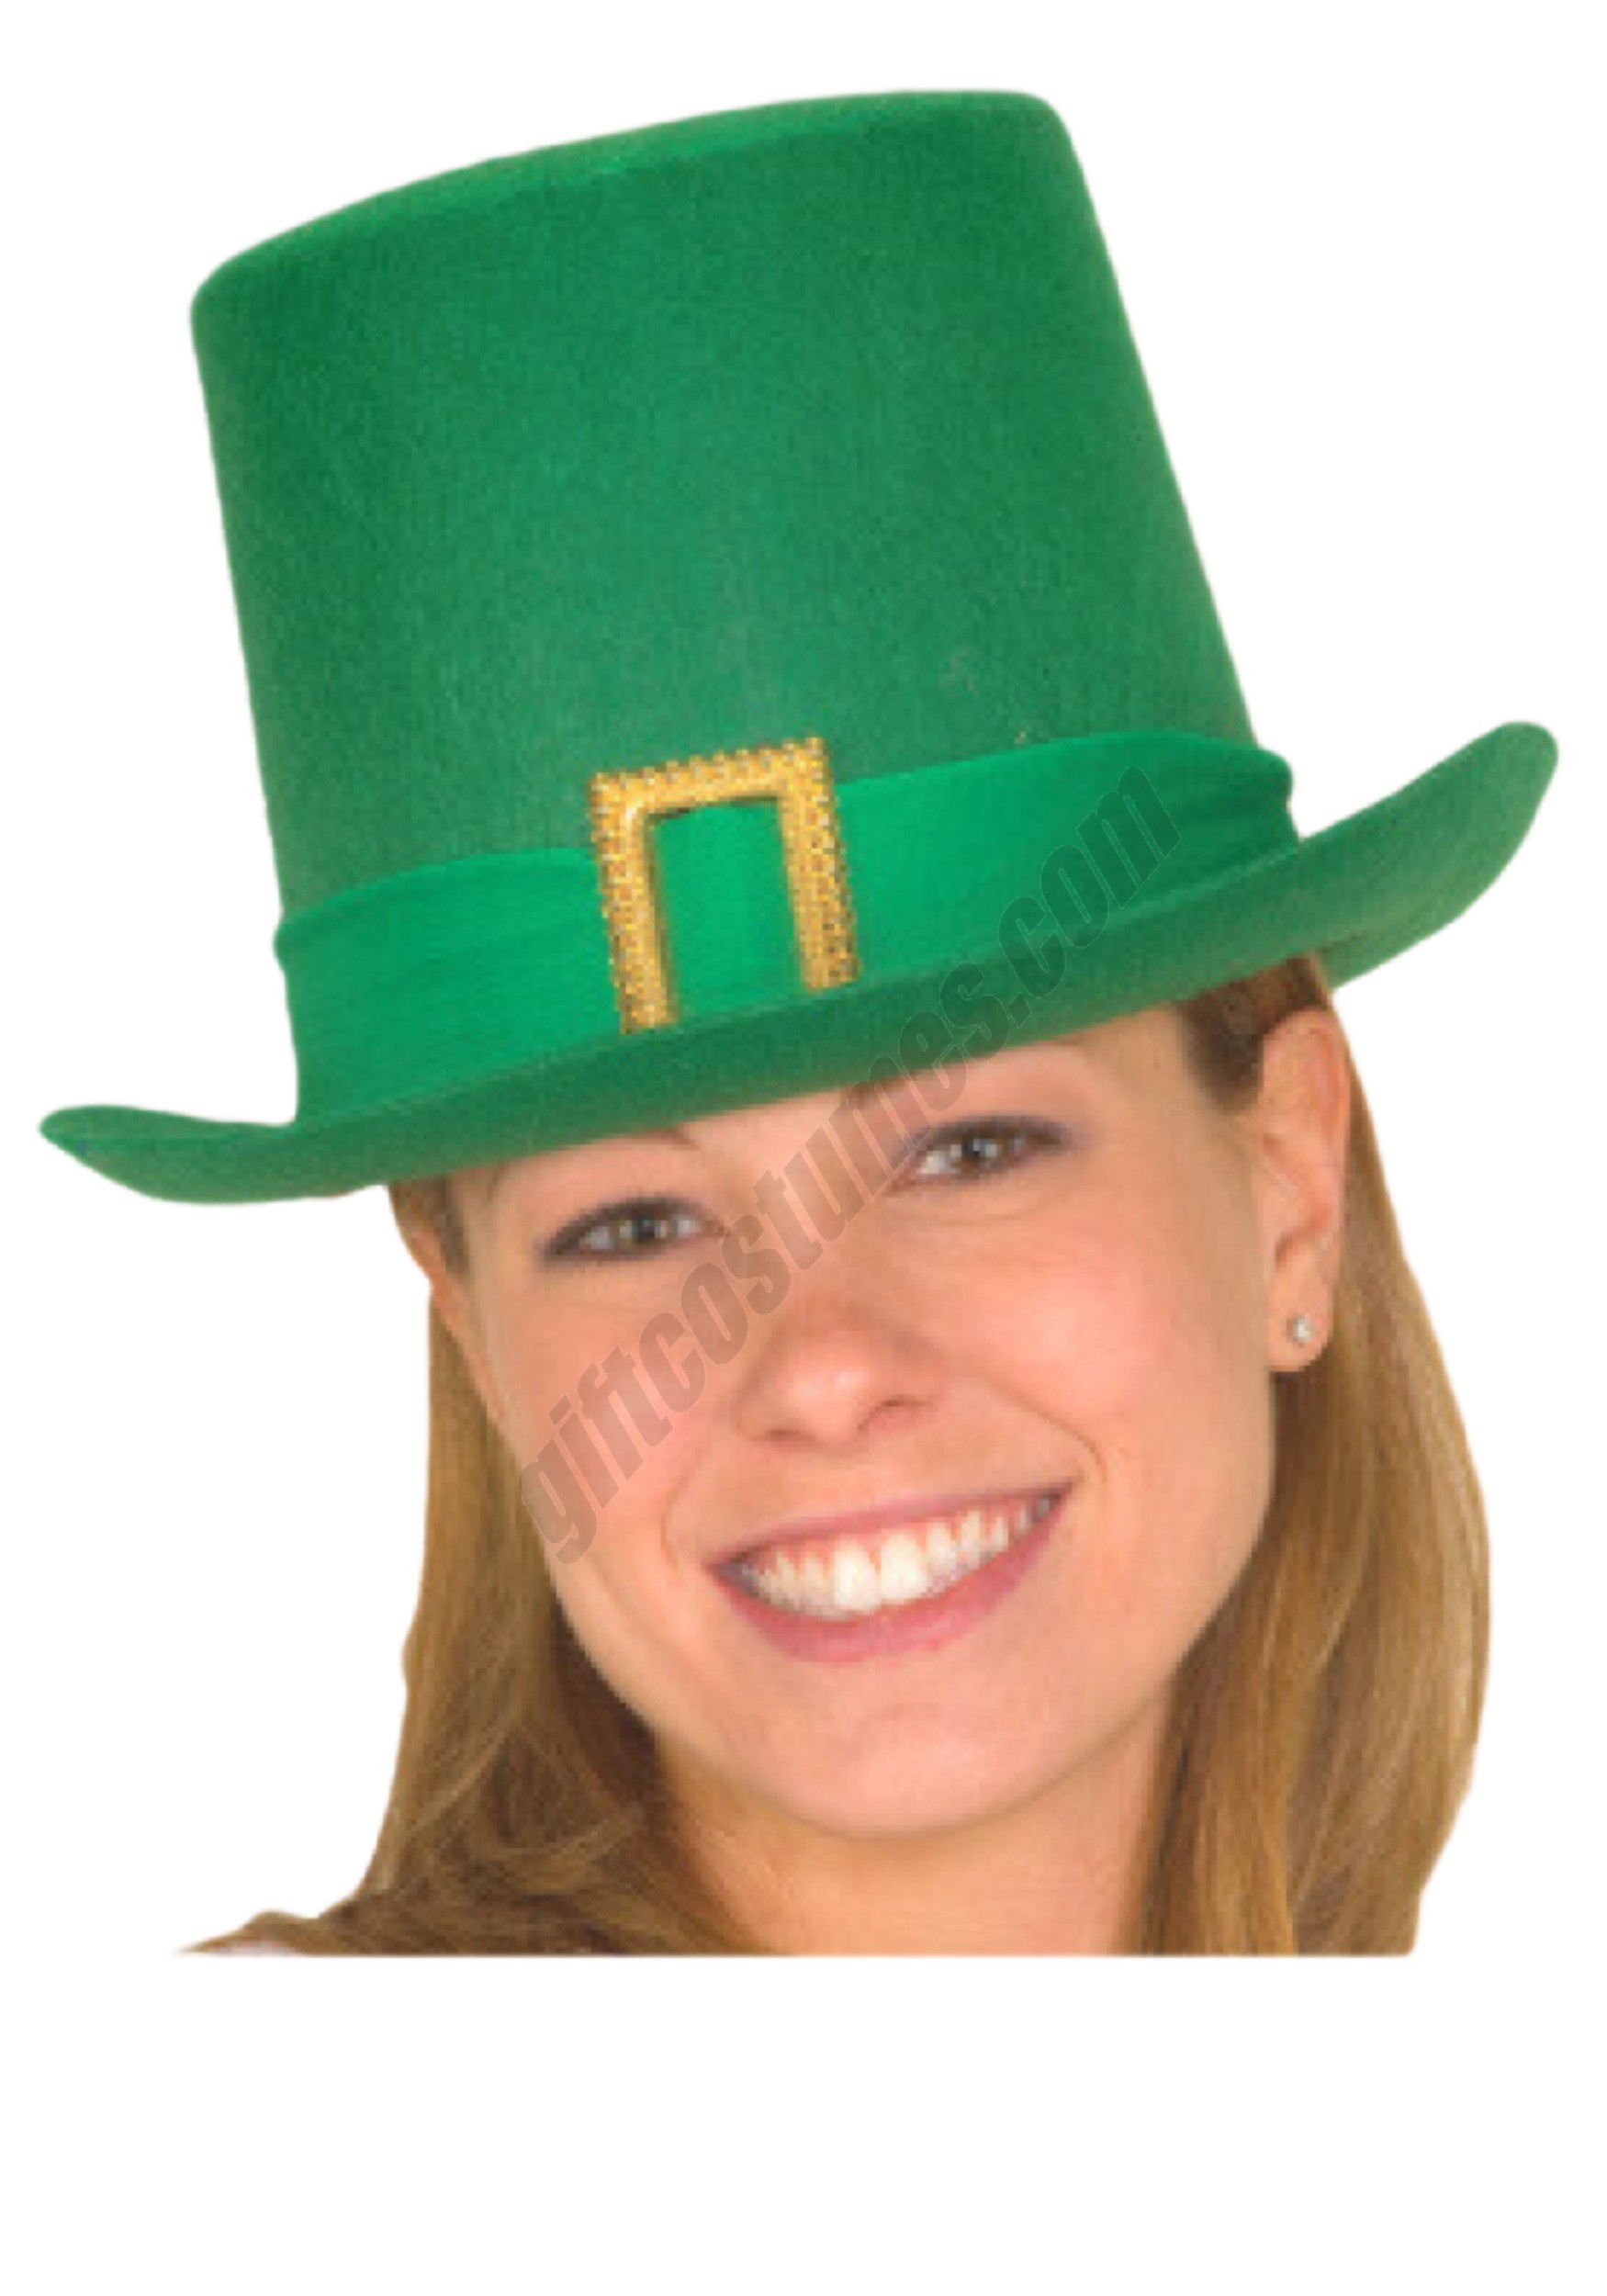 St. Patricks Day Tall Hat Promotions - St. Patricks Day Tall Hat Promotions